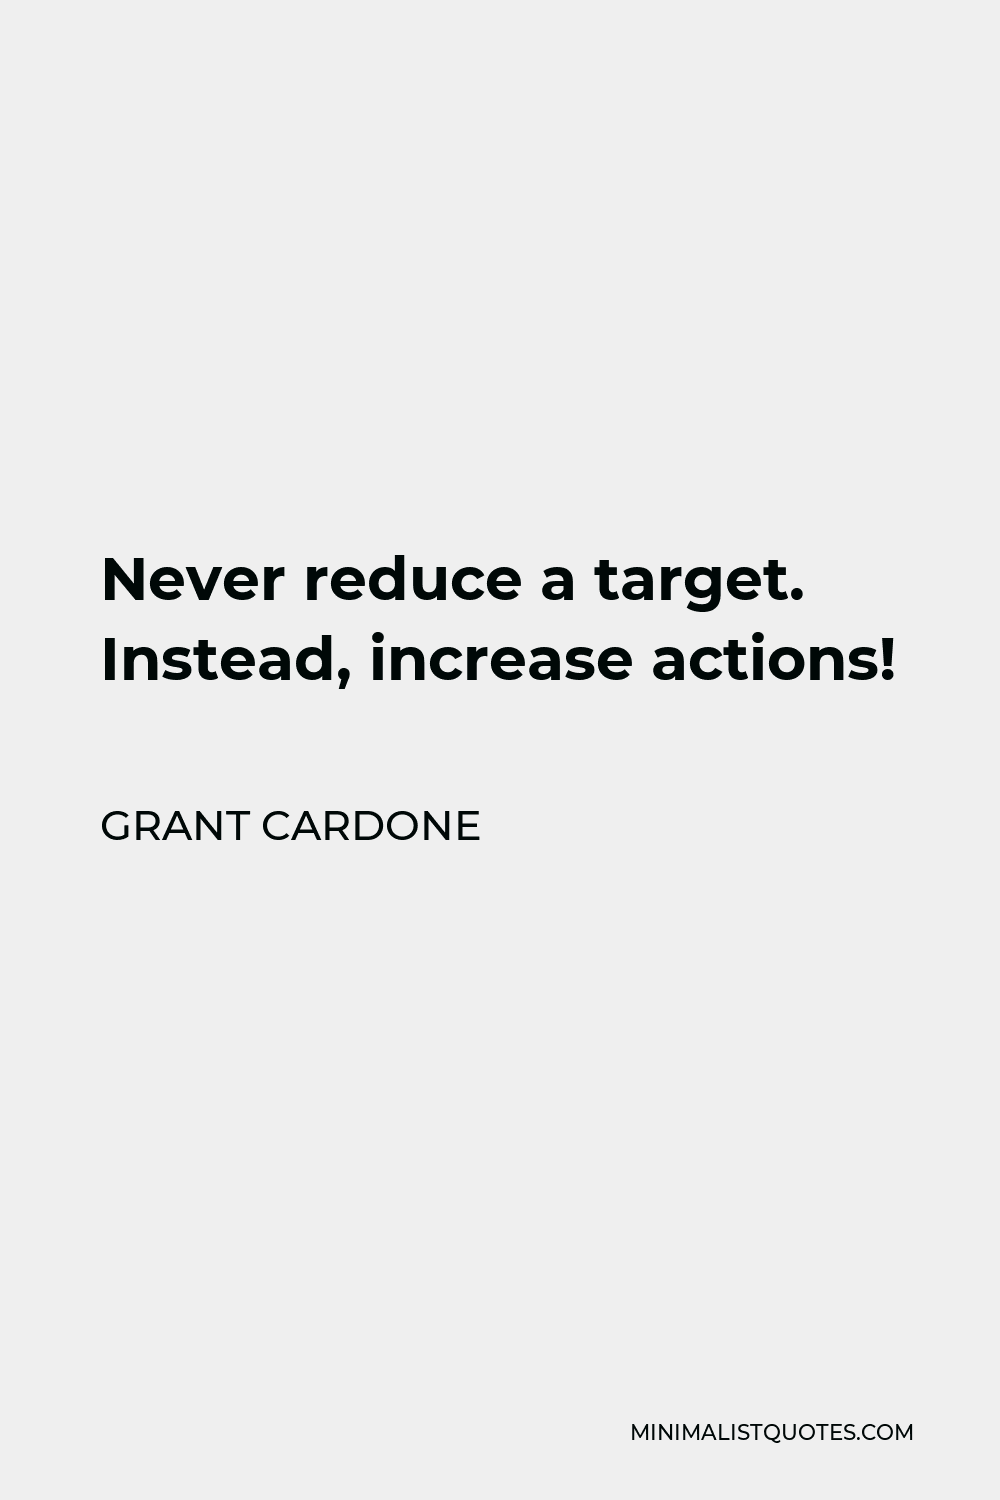 Grant Cardone Quote - Never reduce a target. Instead, increase actions. When you start rethinking your targets, making up excuses, and letting yourself off the hook, you are giving up on your dreams!